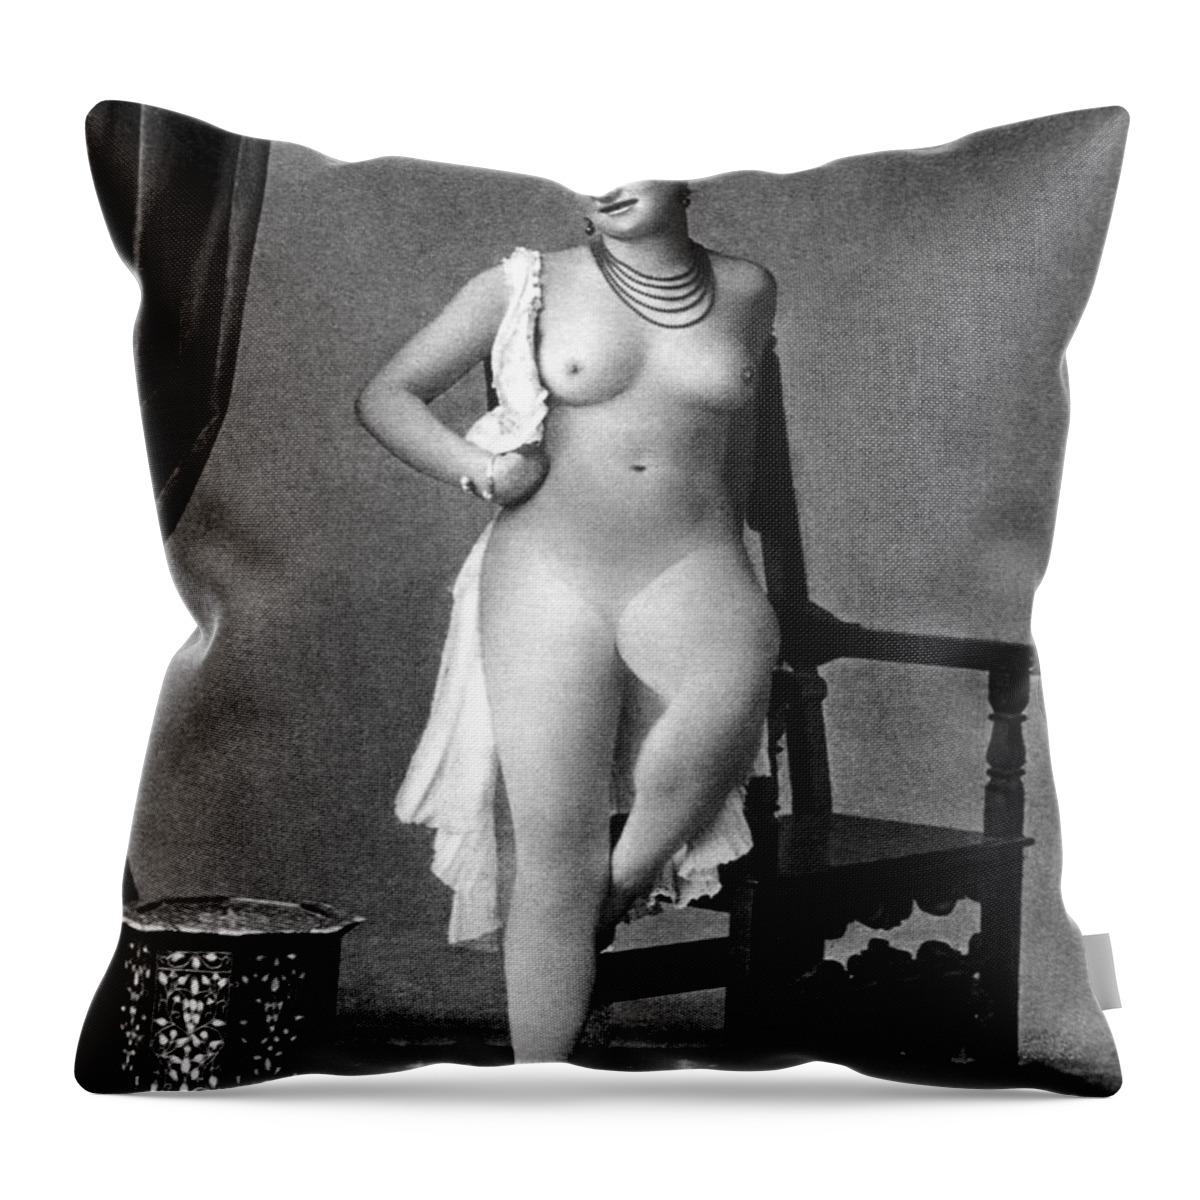 1880 Throw Pillow featuring the photograph NUDE POSING, c1880 by Granger